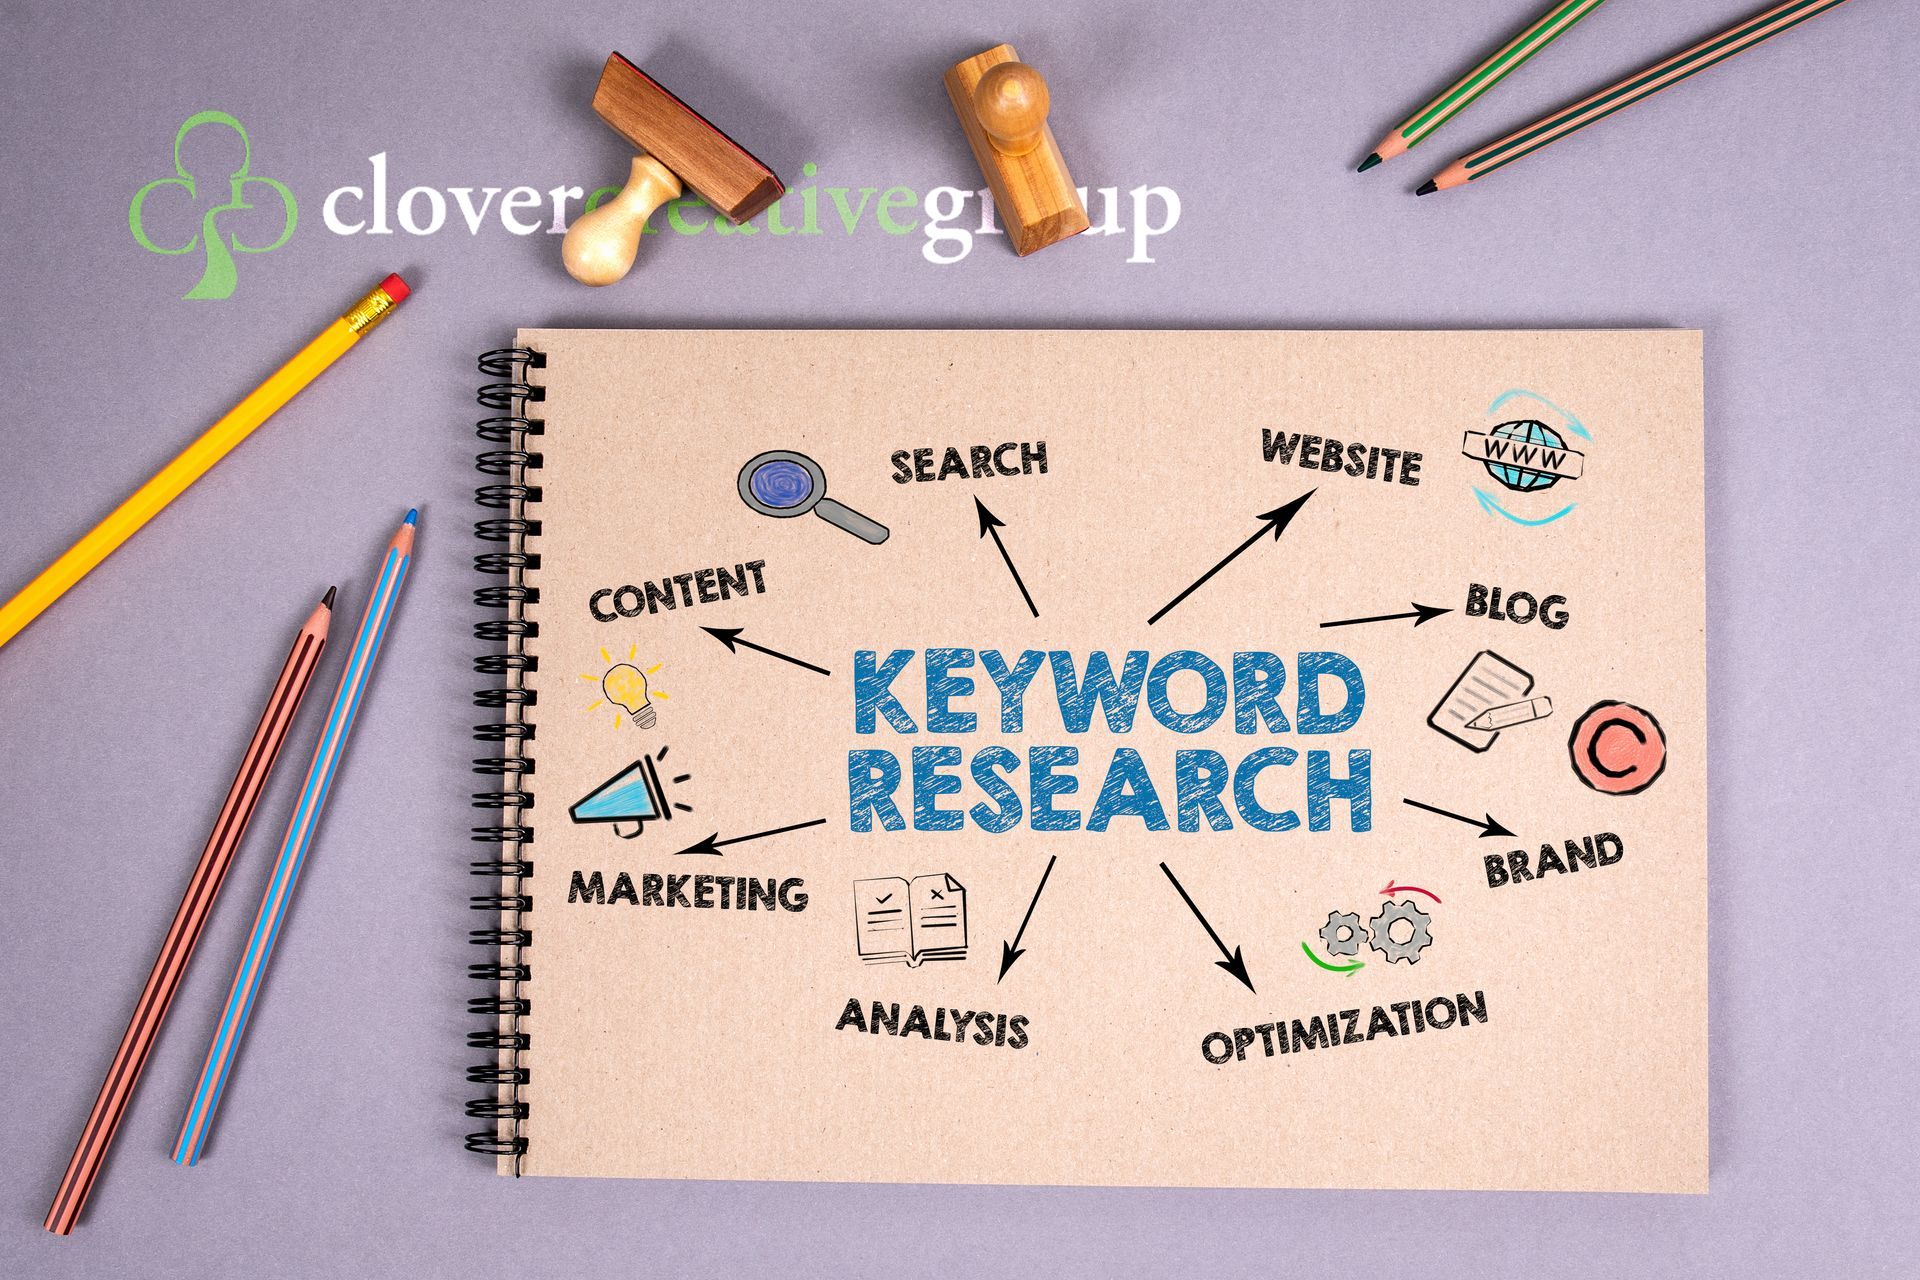 Keyword research is essential for success and getting found